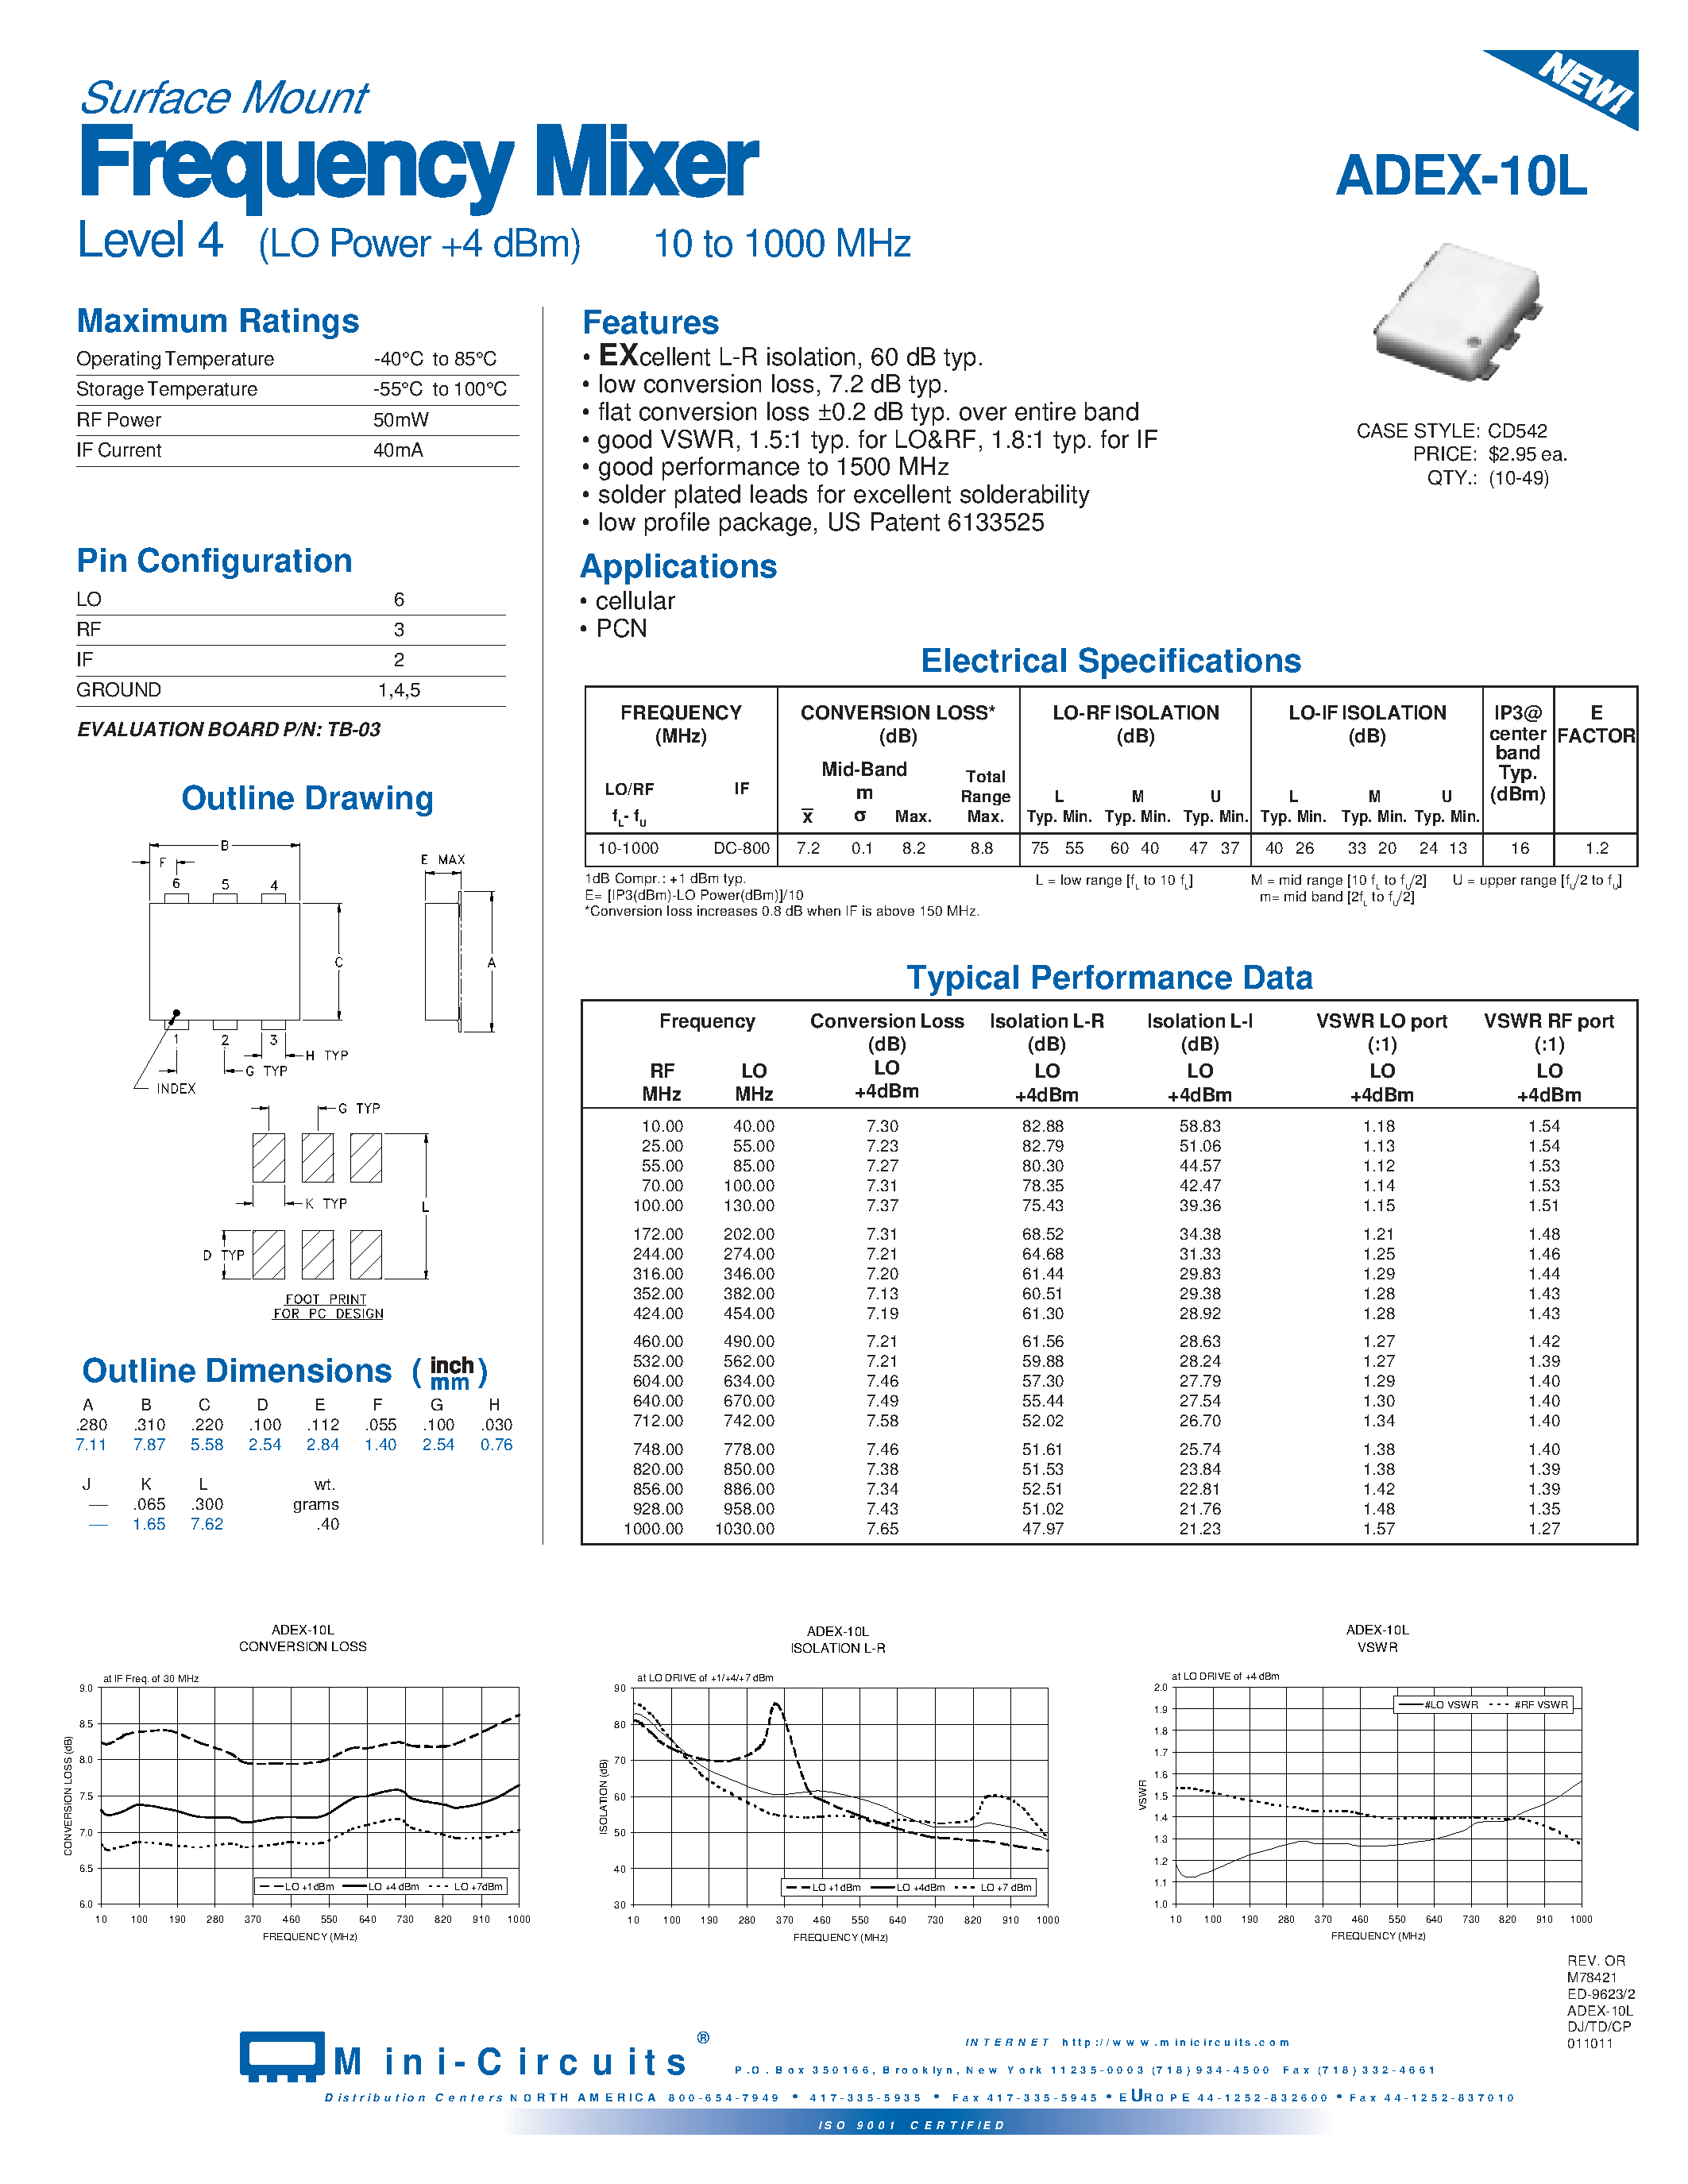 Datasheet ADEX-10L - Frequency Mixer Level 4 (LO Power +4 dBm) 10 to 1000 MHz page 1